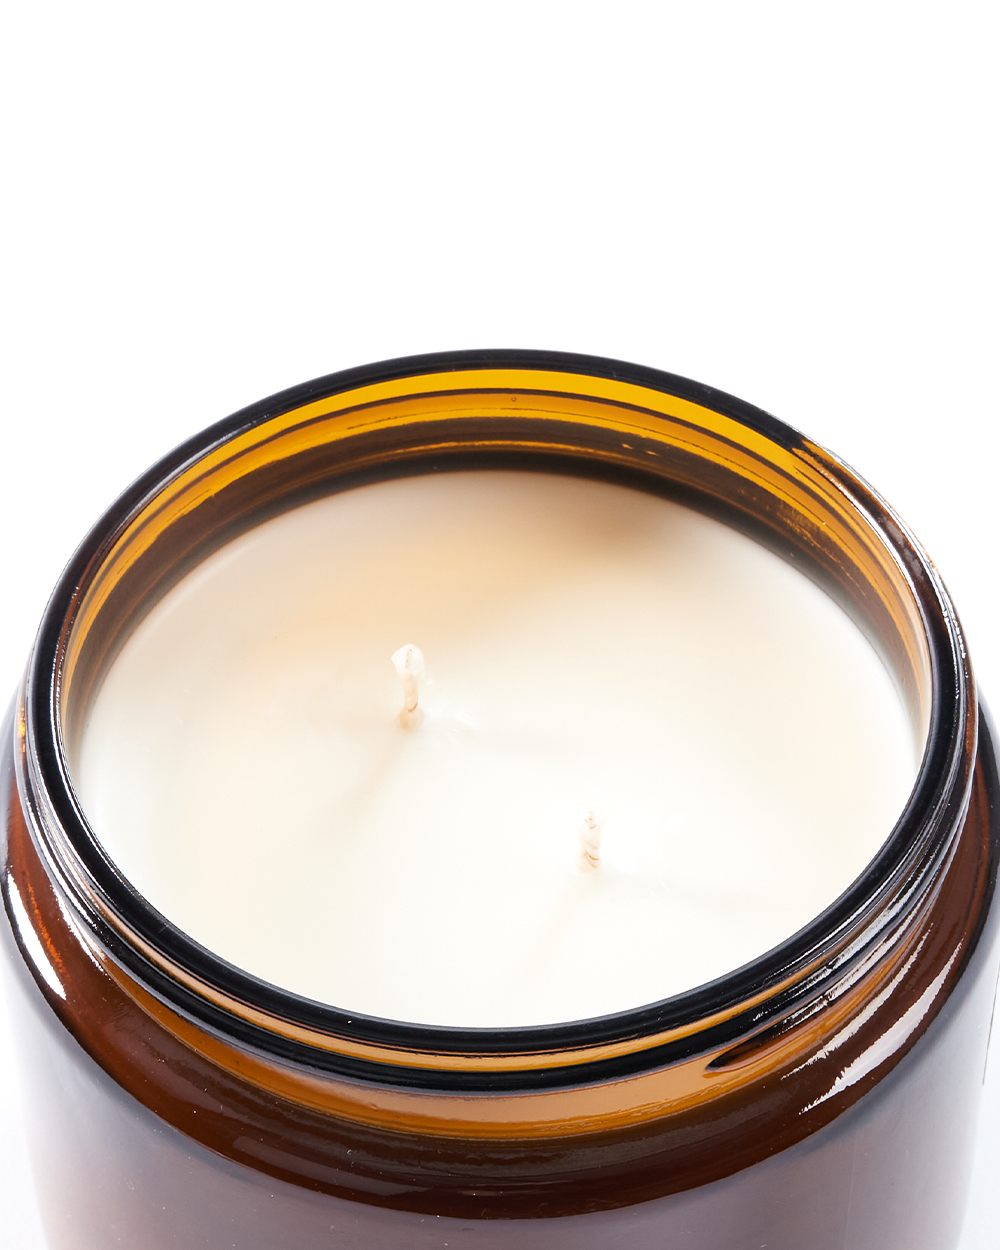 500g Amber Jay Soy Candle - YEN